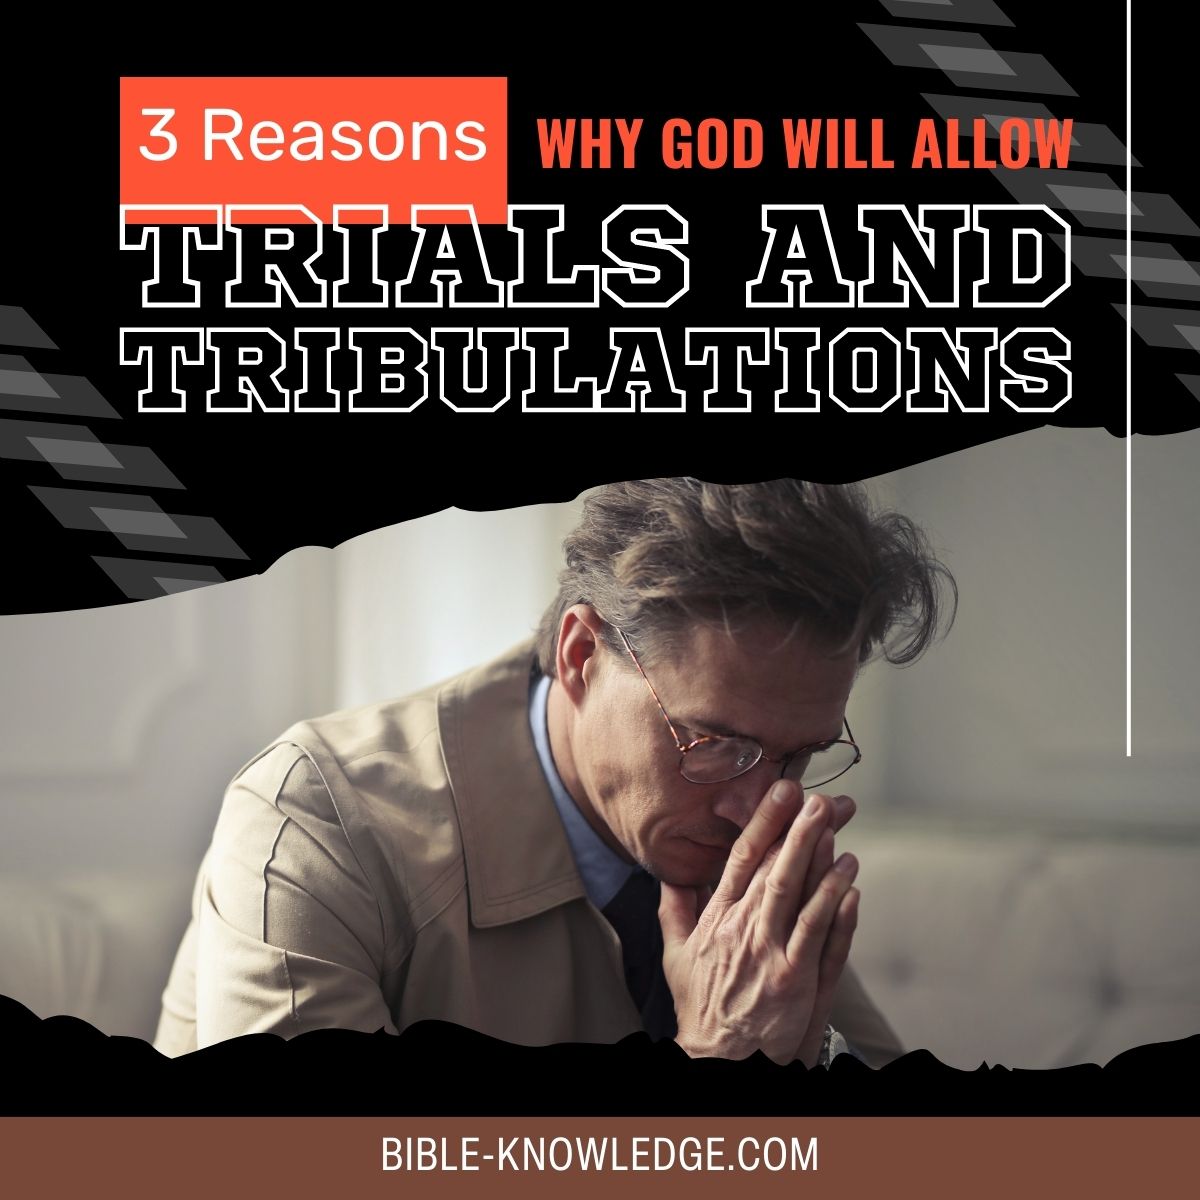 3 Reasons Why God Will Allow Trials and Tribulations